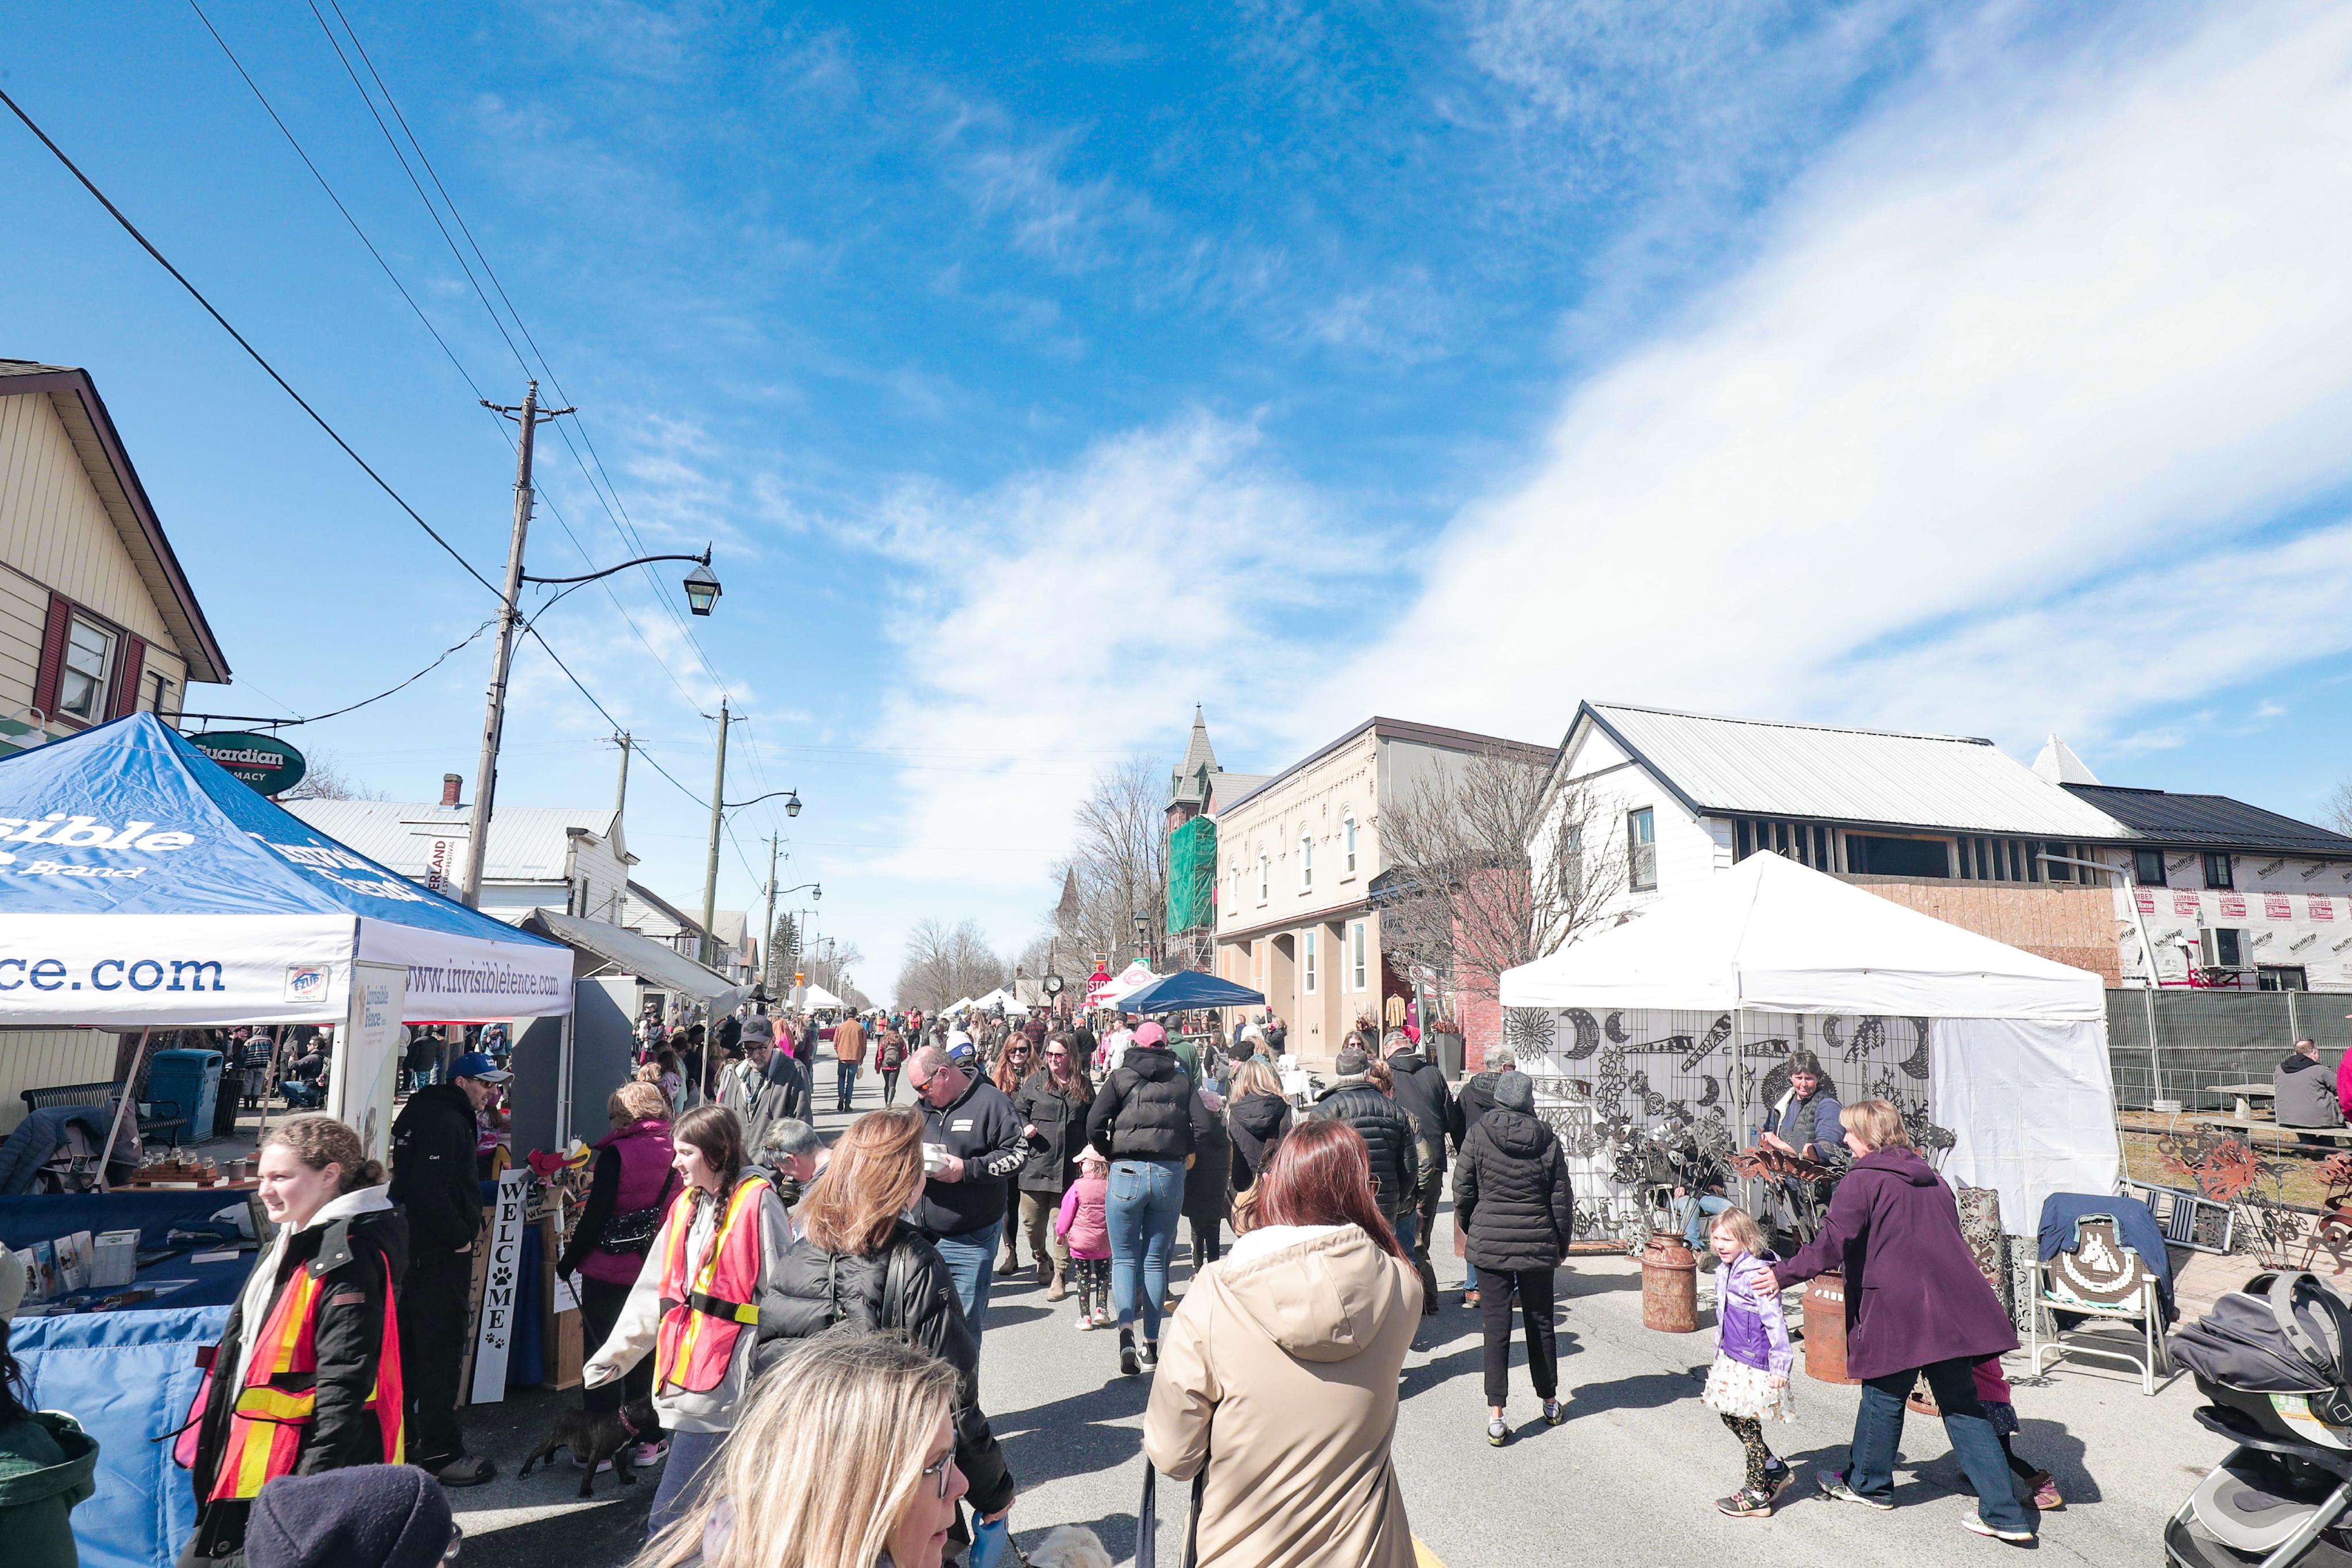 Crowd of people walking outdoors at the Sunderland Maple Syrup Festival